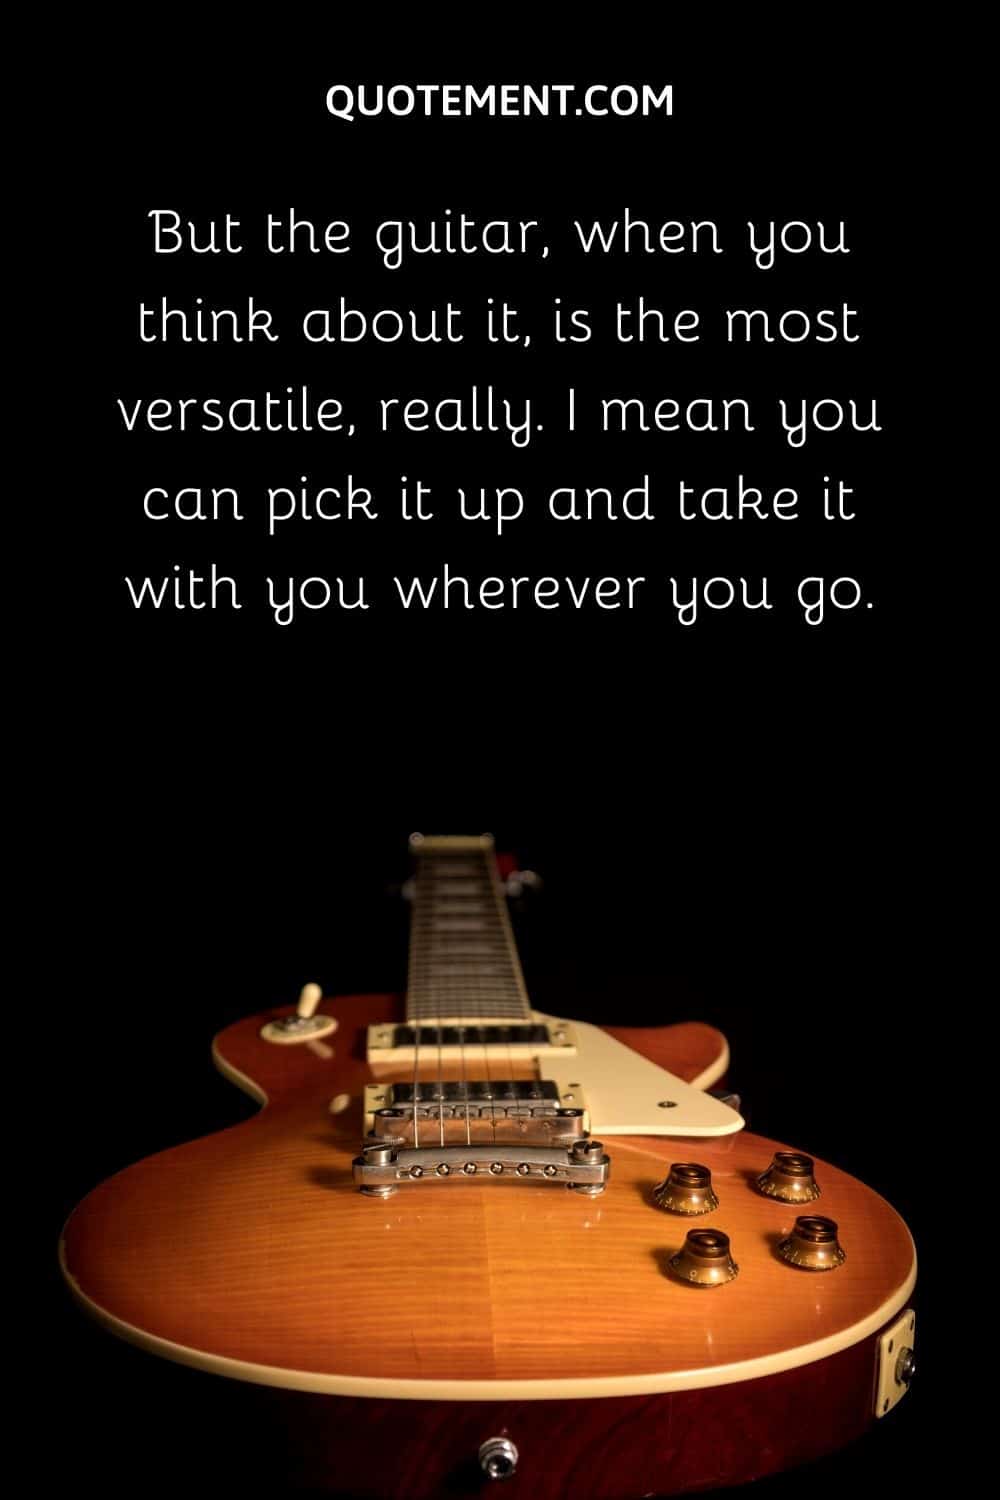 But the guitar, when you think about it, is the most versatile,